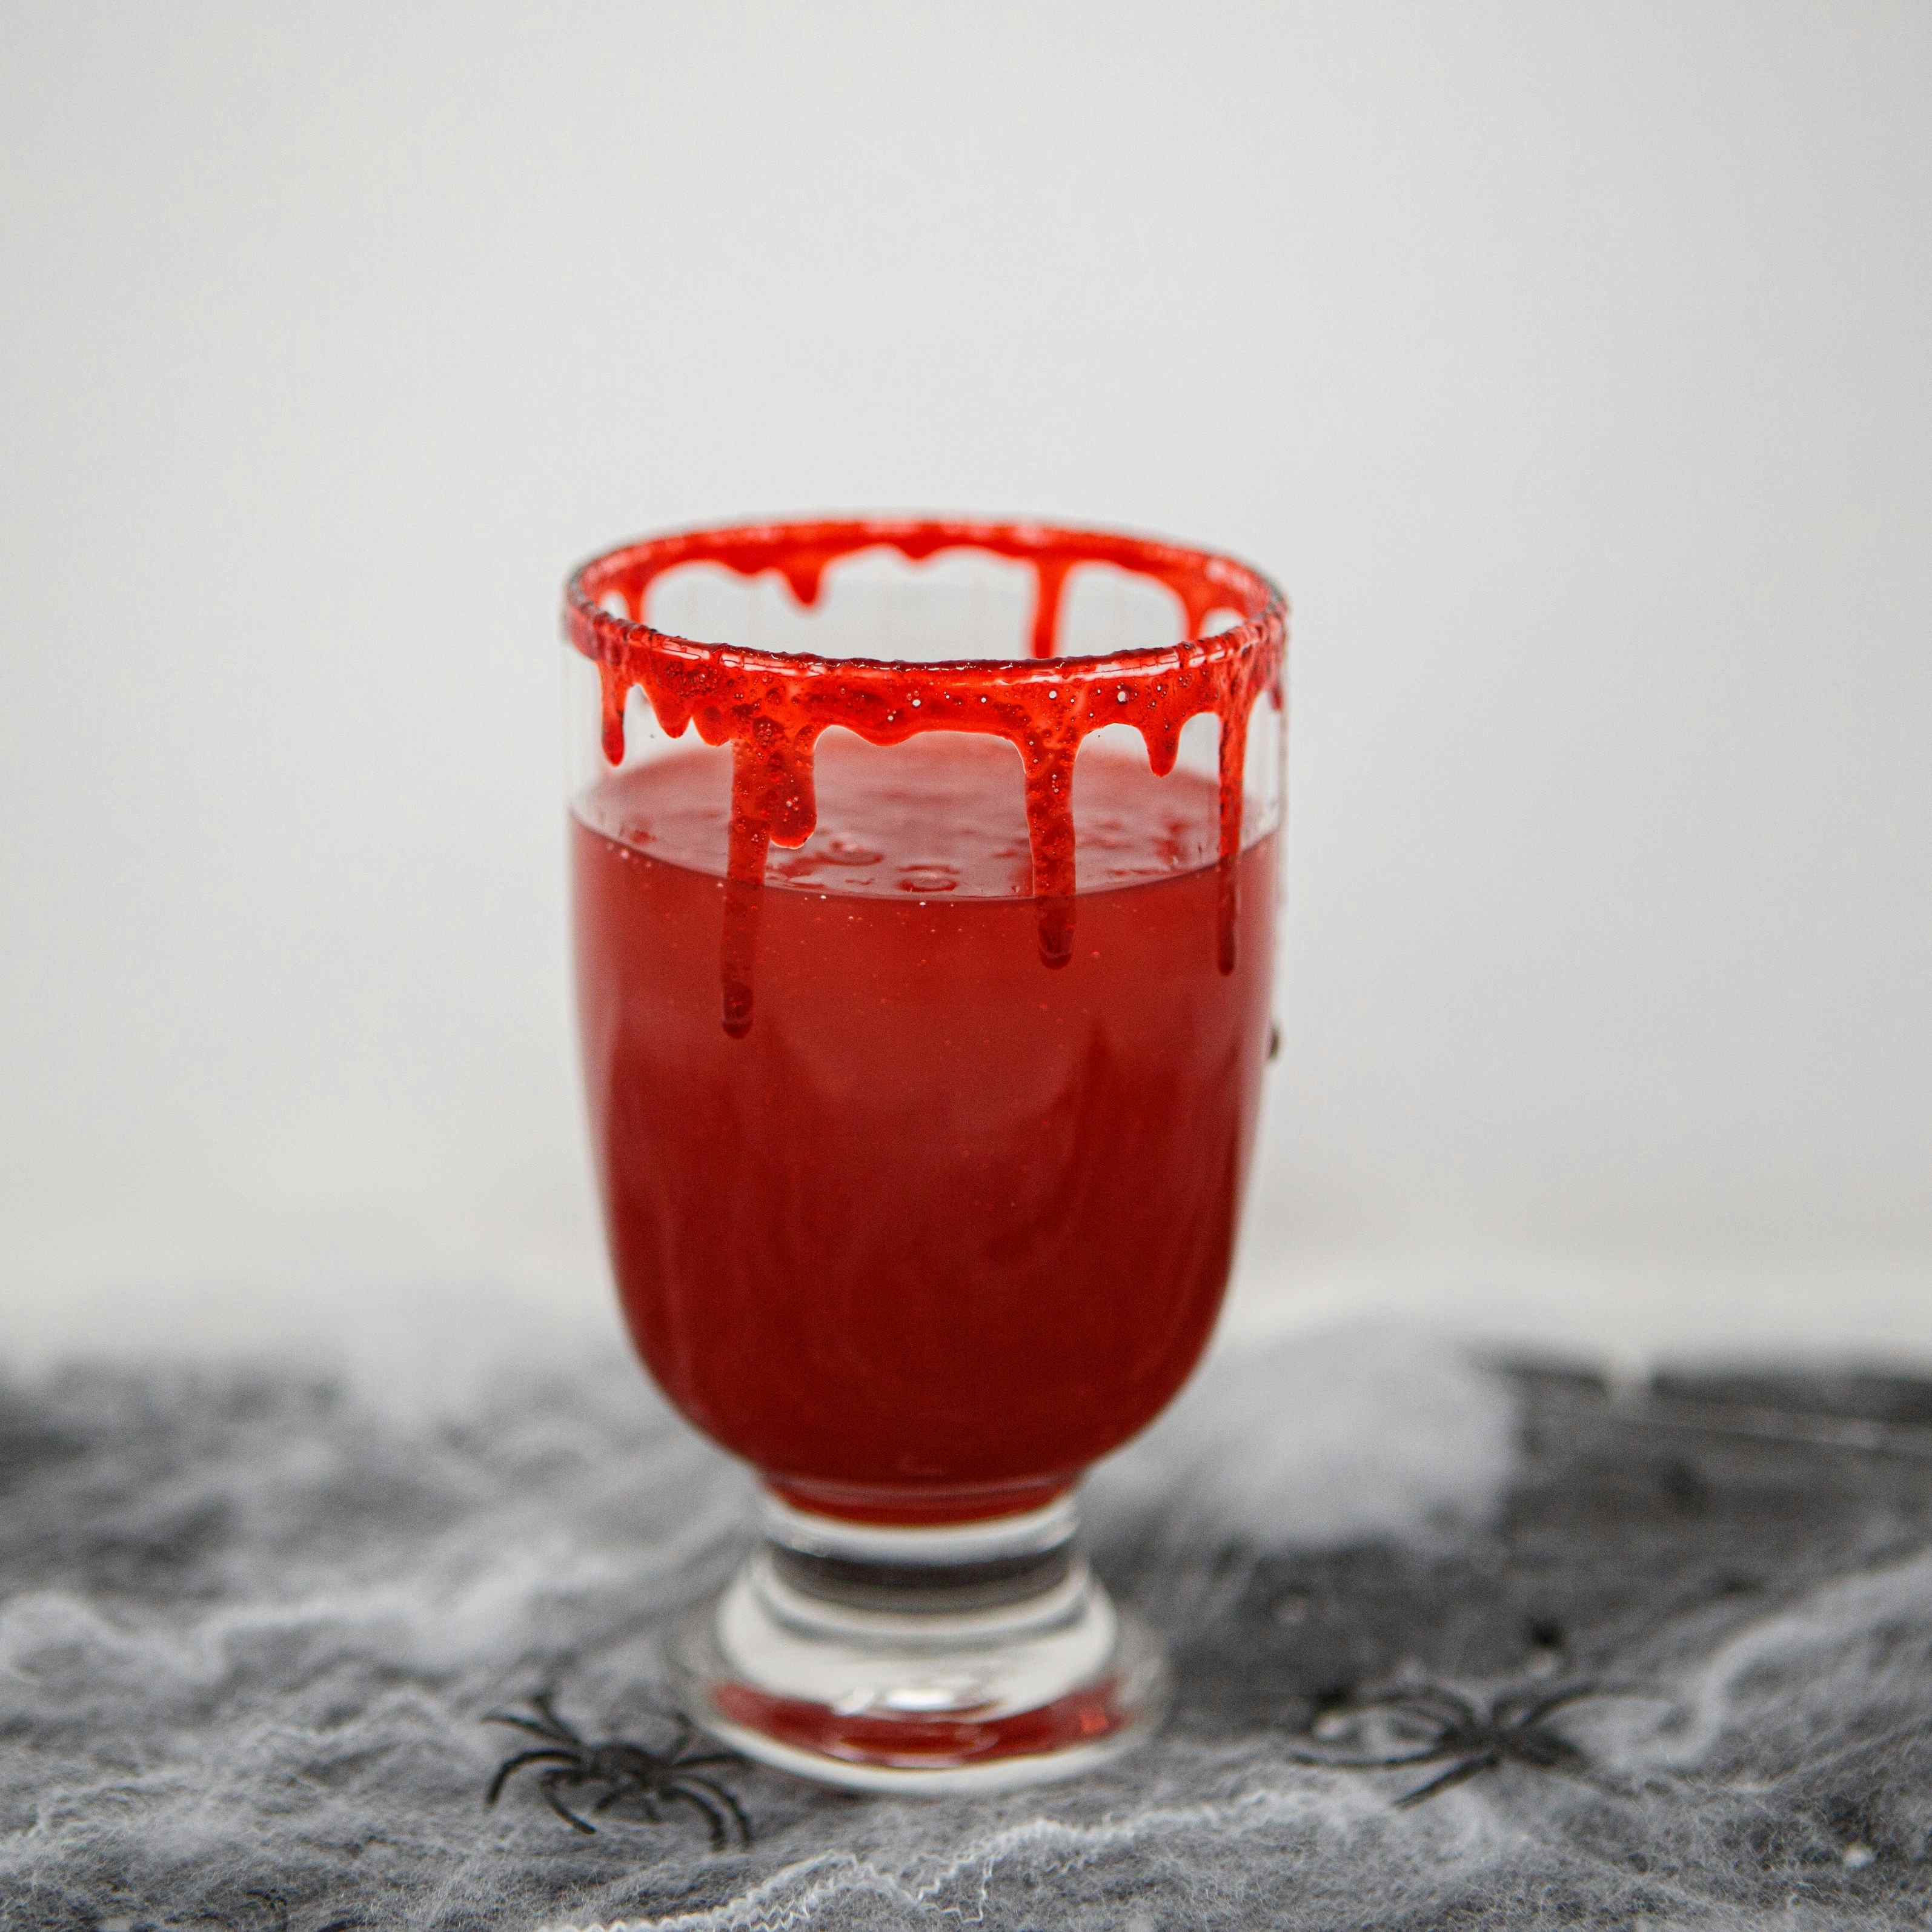 Thick & Easy Ready to Use Thickened Beverage, Cranberry Juice Cocktail Flavor, 4 oz., Portion Cup